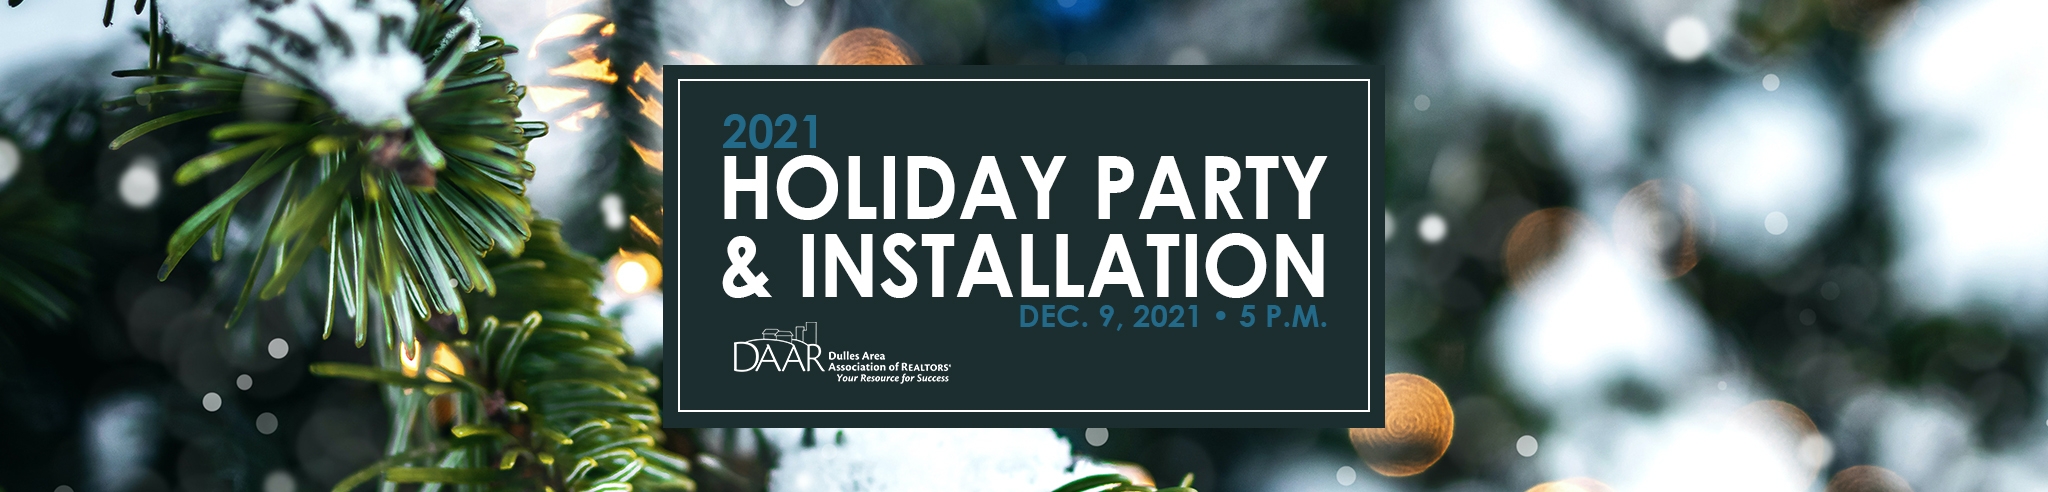 2021 HOliday part installation (view full size)